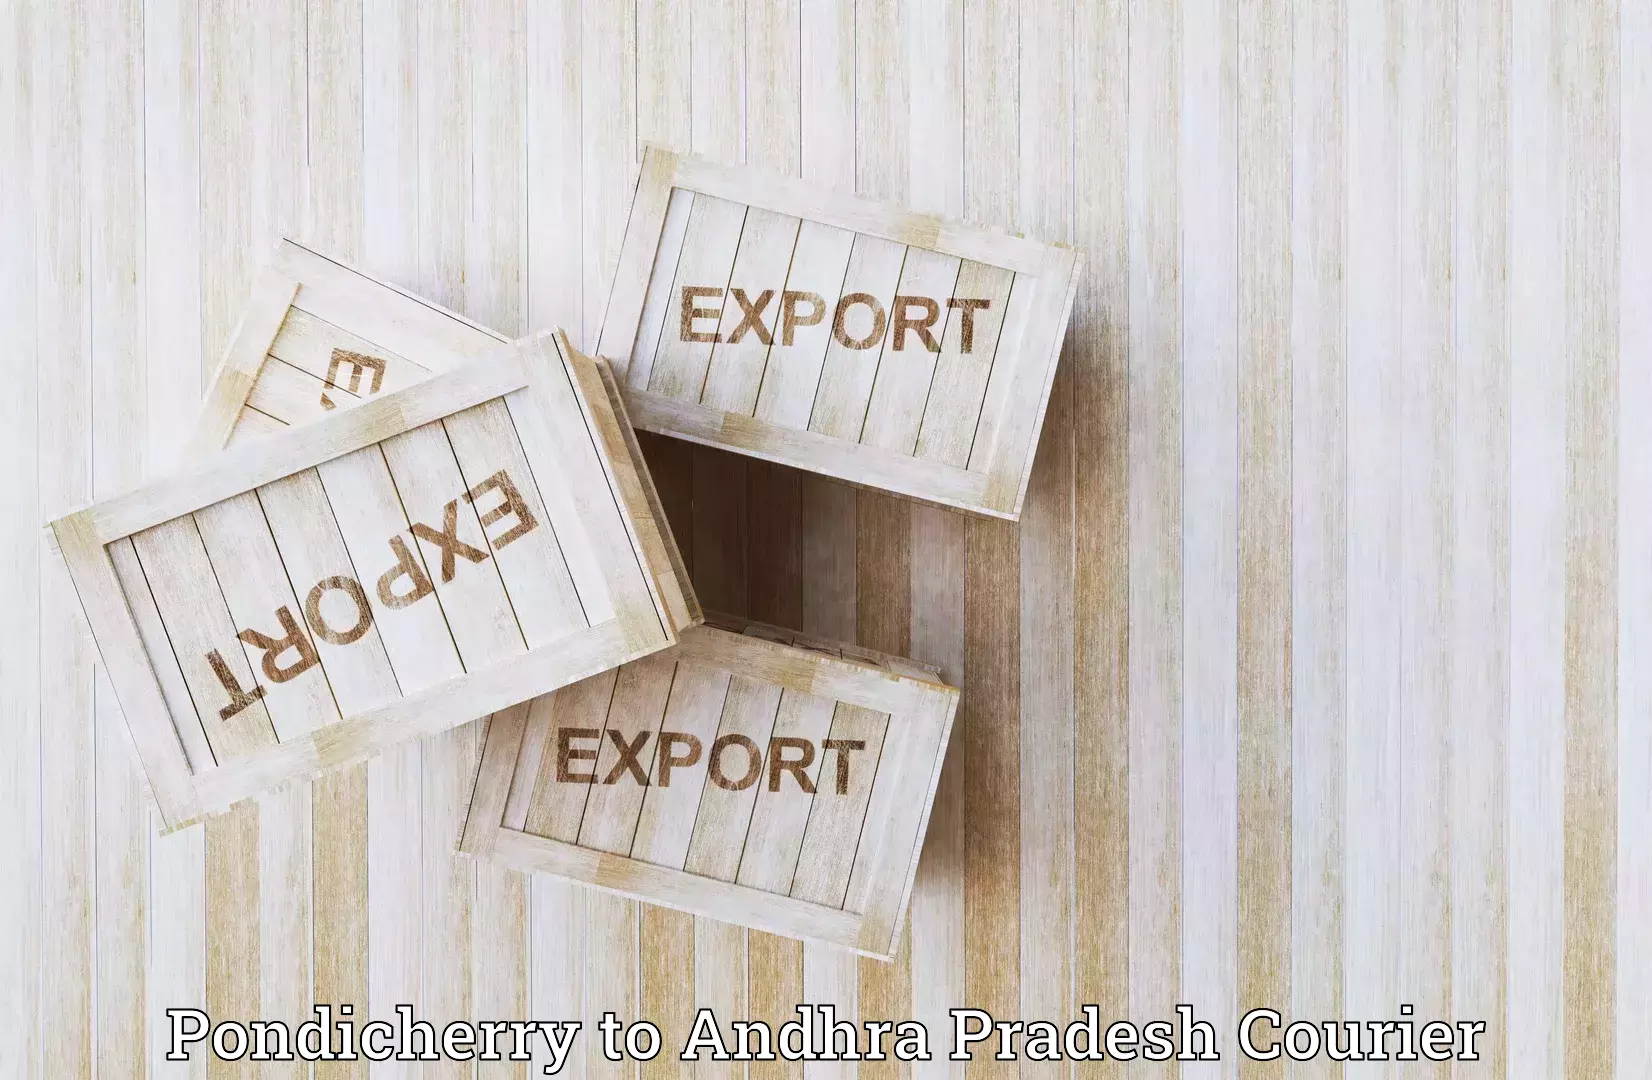 Cost-effective shipping solutions Pondicherry to Guntur